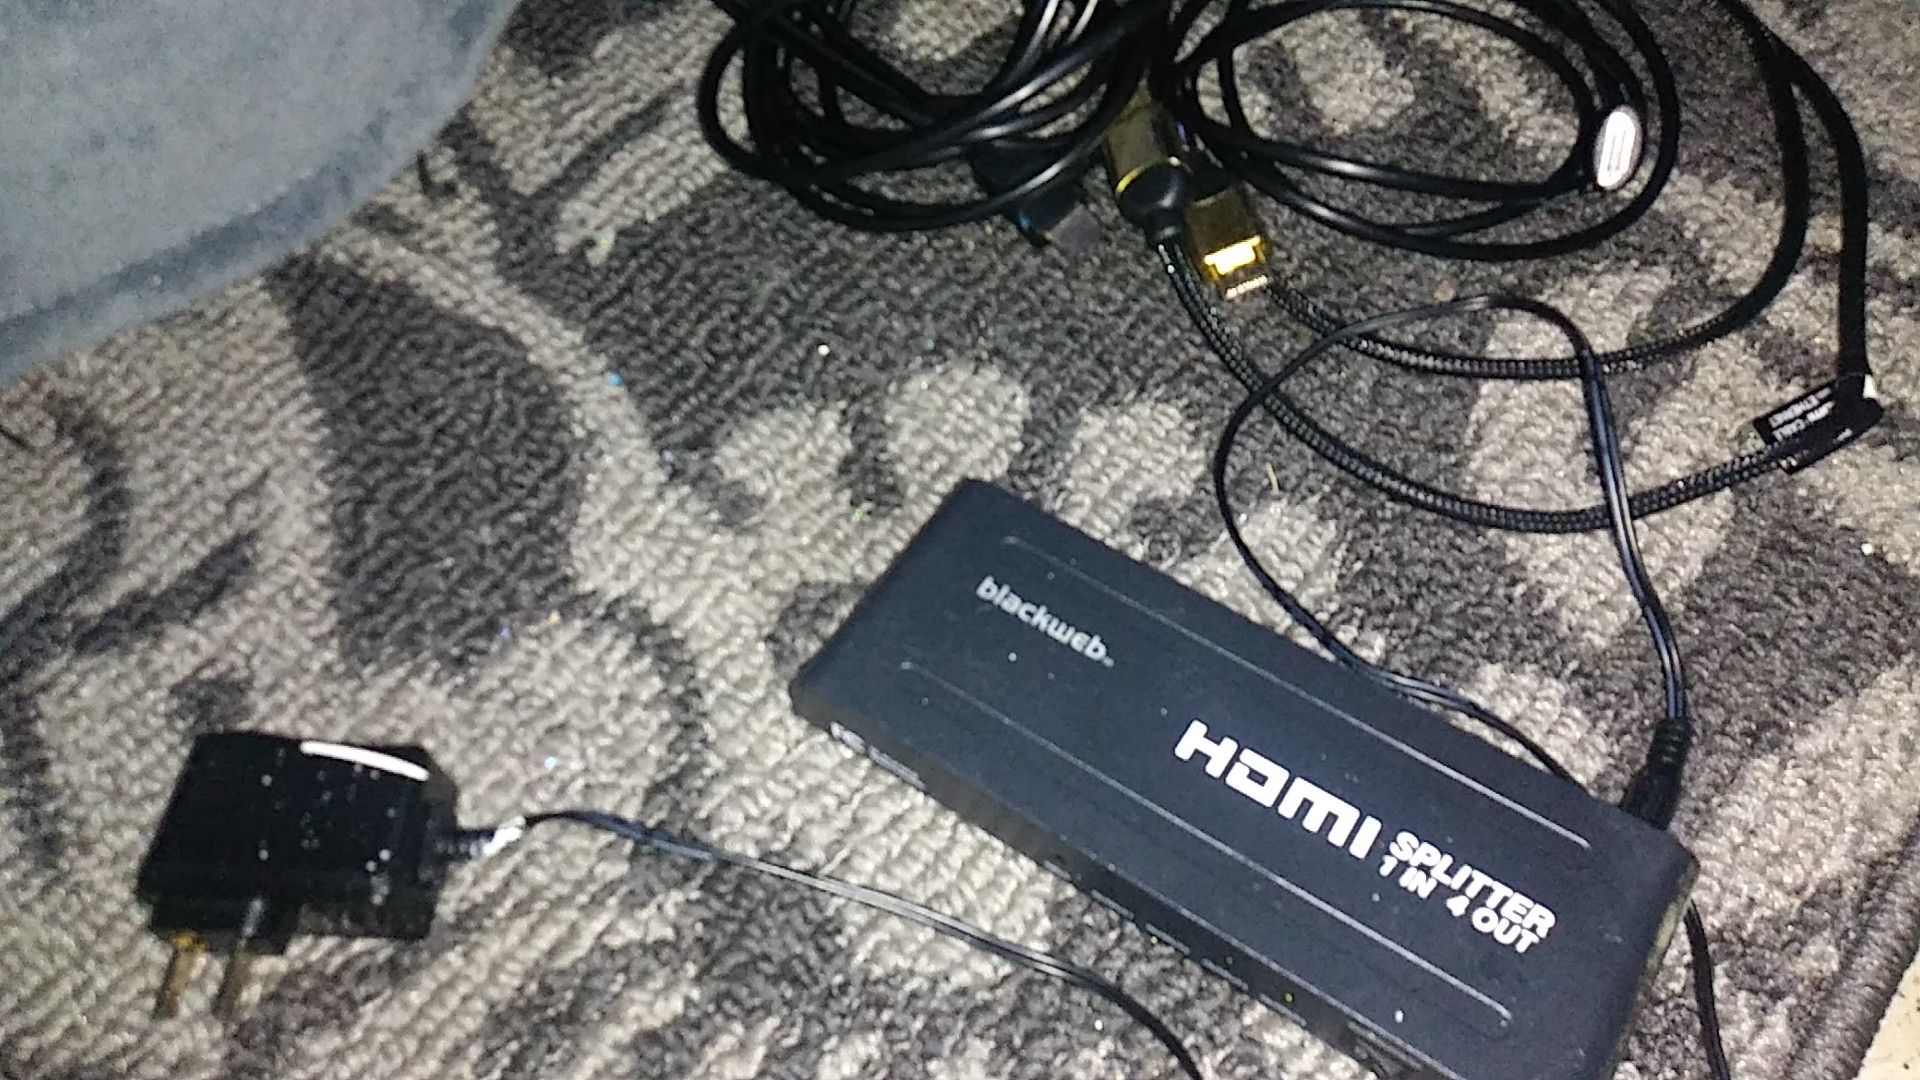 HDMI Splitter with 3 HDMI cables $20